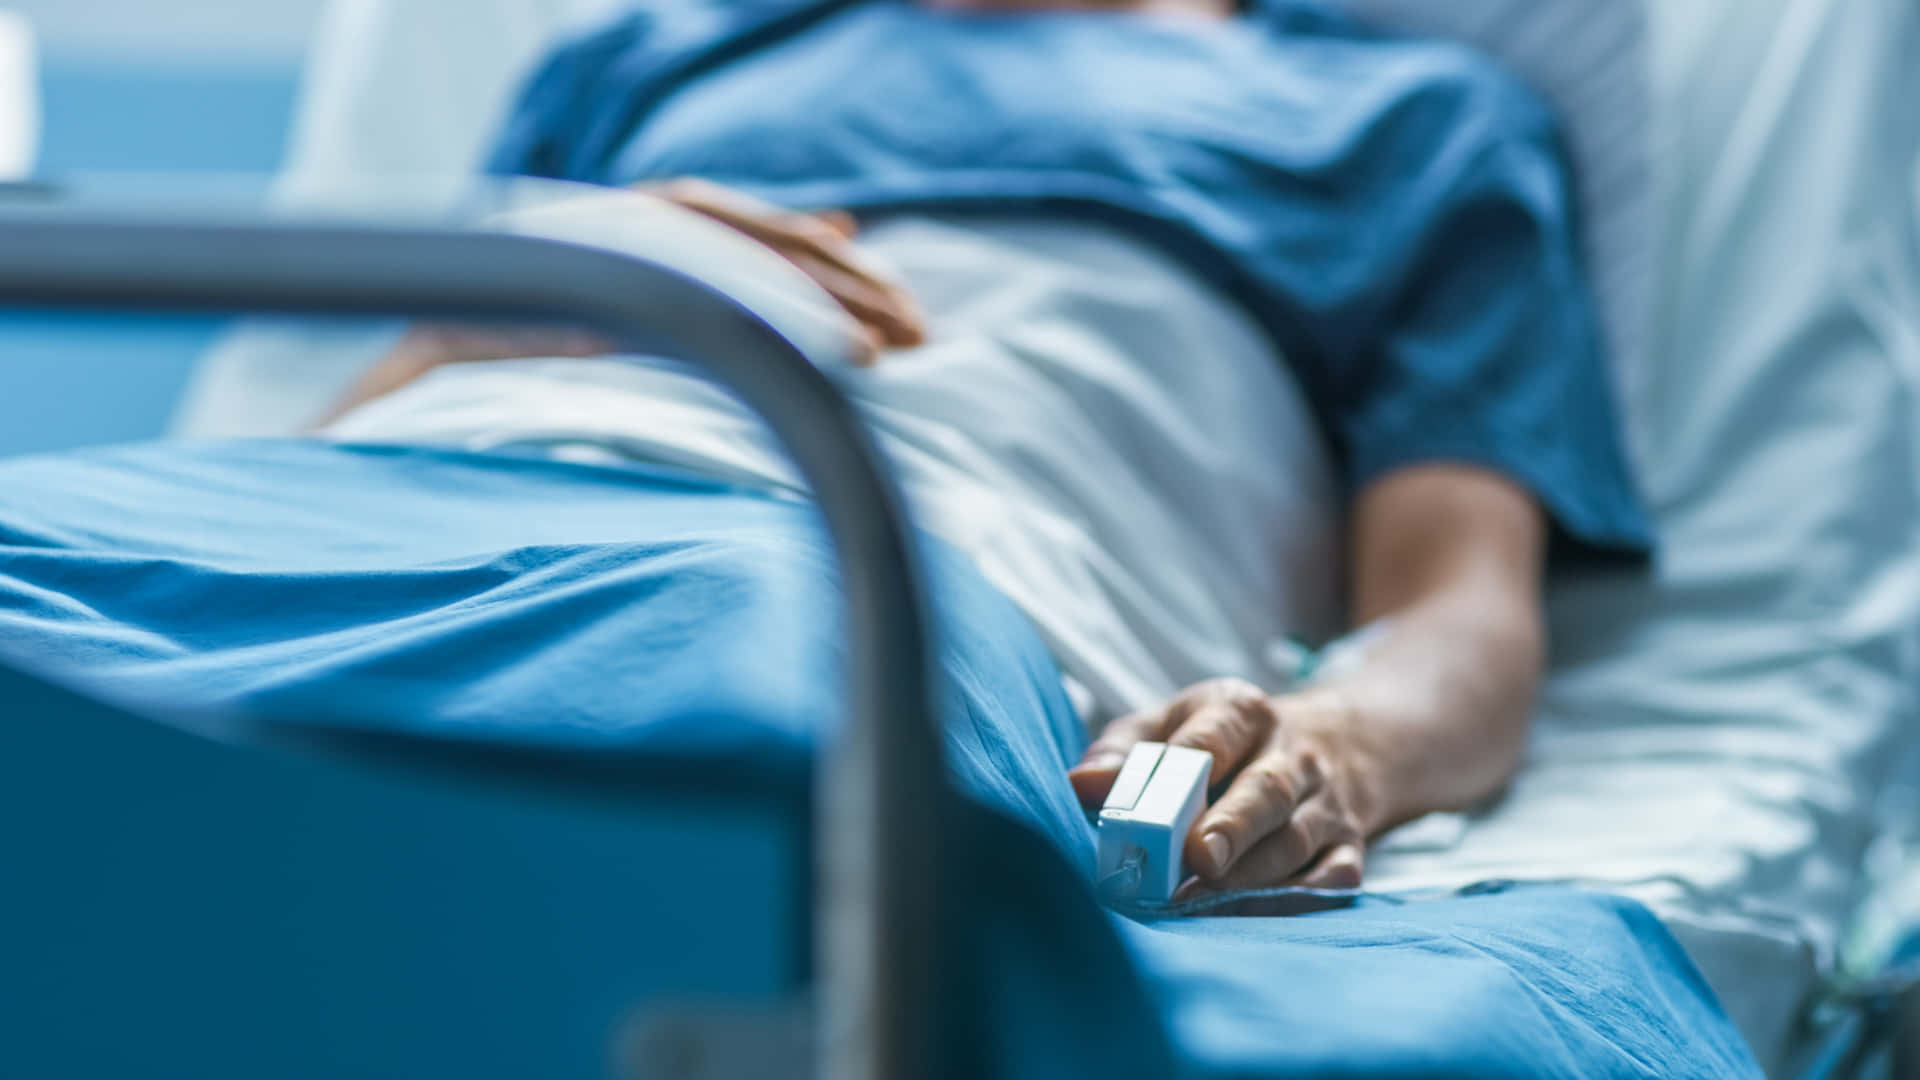 Patient Lying On Hospital Bed Wallpaper